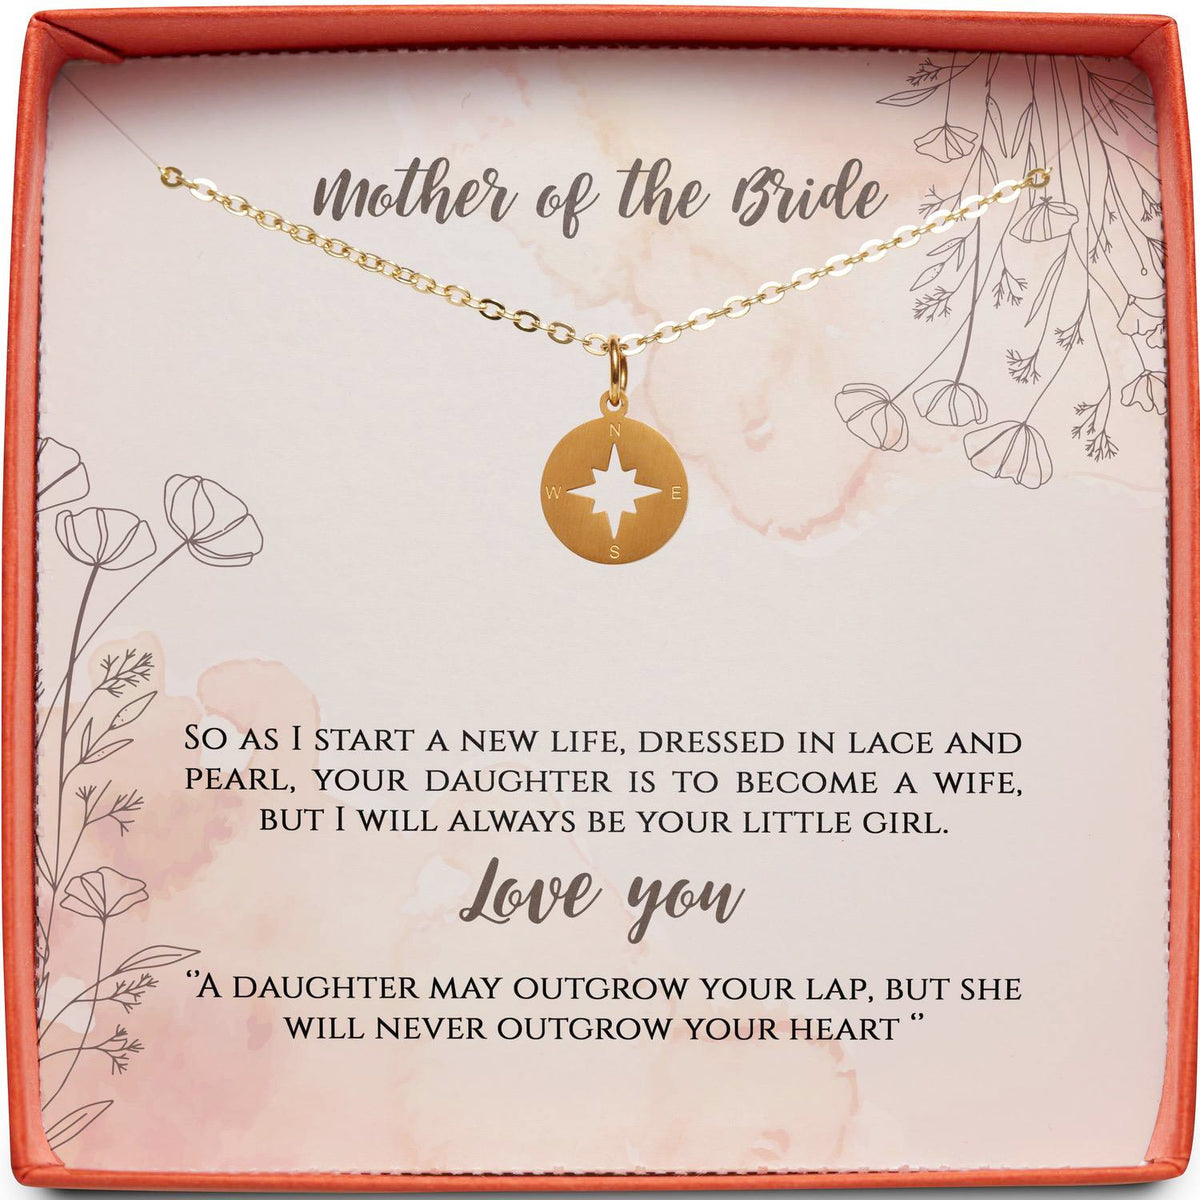 Mother of the Bride (From Daughter) | Dressed in Lace and Pearl | Compass Necklace